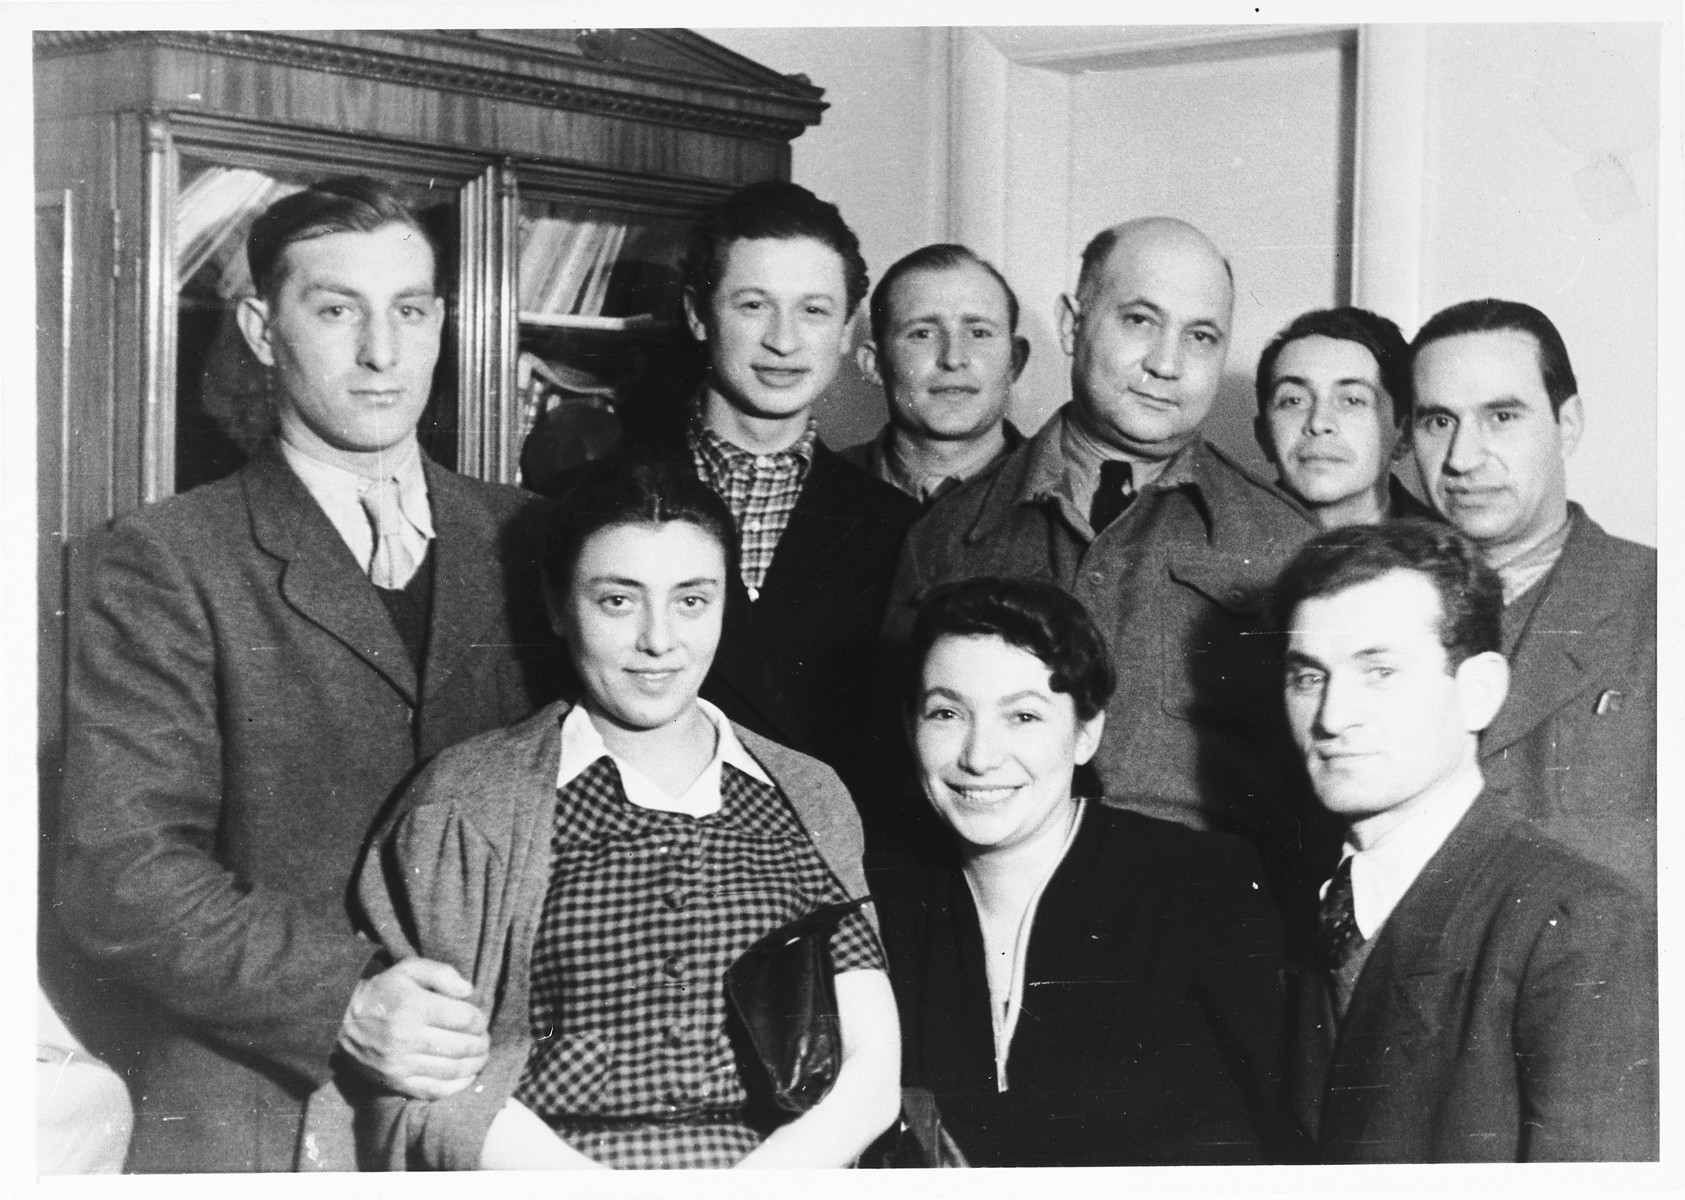 UNRRA camp director Harold Fishbein poses with a group of Jewish DPs in an apartment in the Schlachtensee displaced persons camp.

Harold Fishbein is pictured in the back row, third from the right.